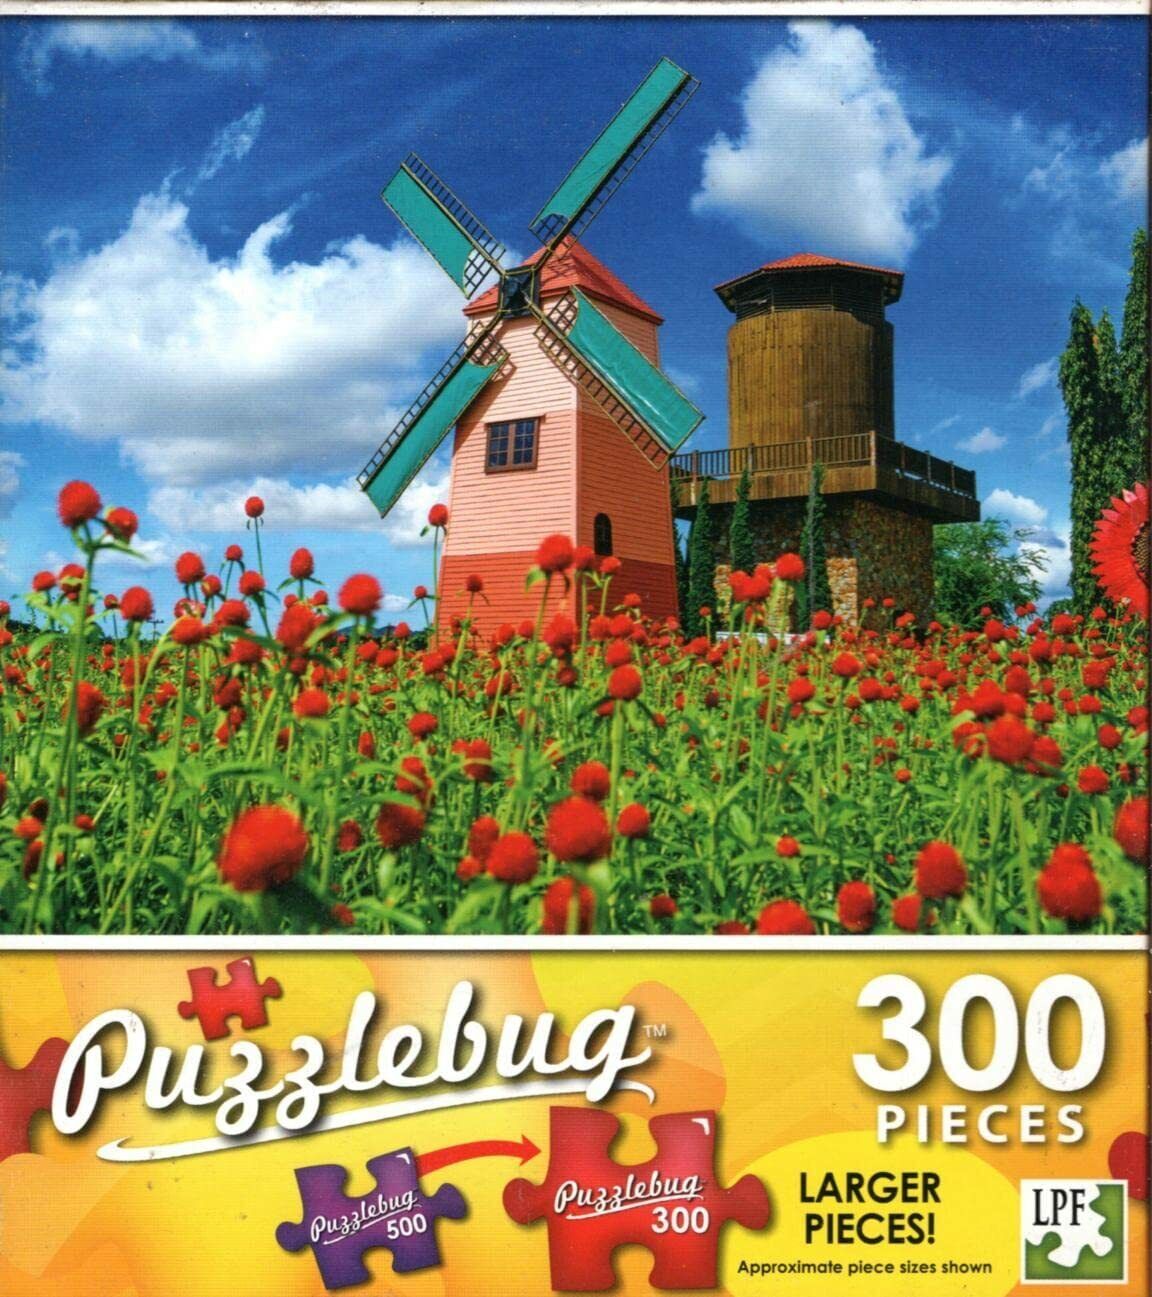 Windmill in The Garden with Colorful Flowers - 300 Pieces Jigsaw Puzzle